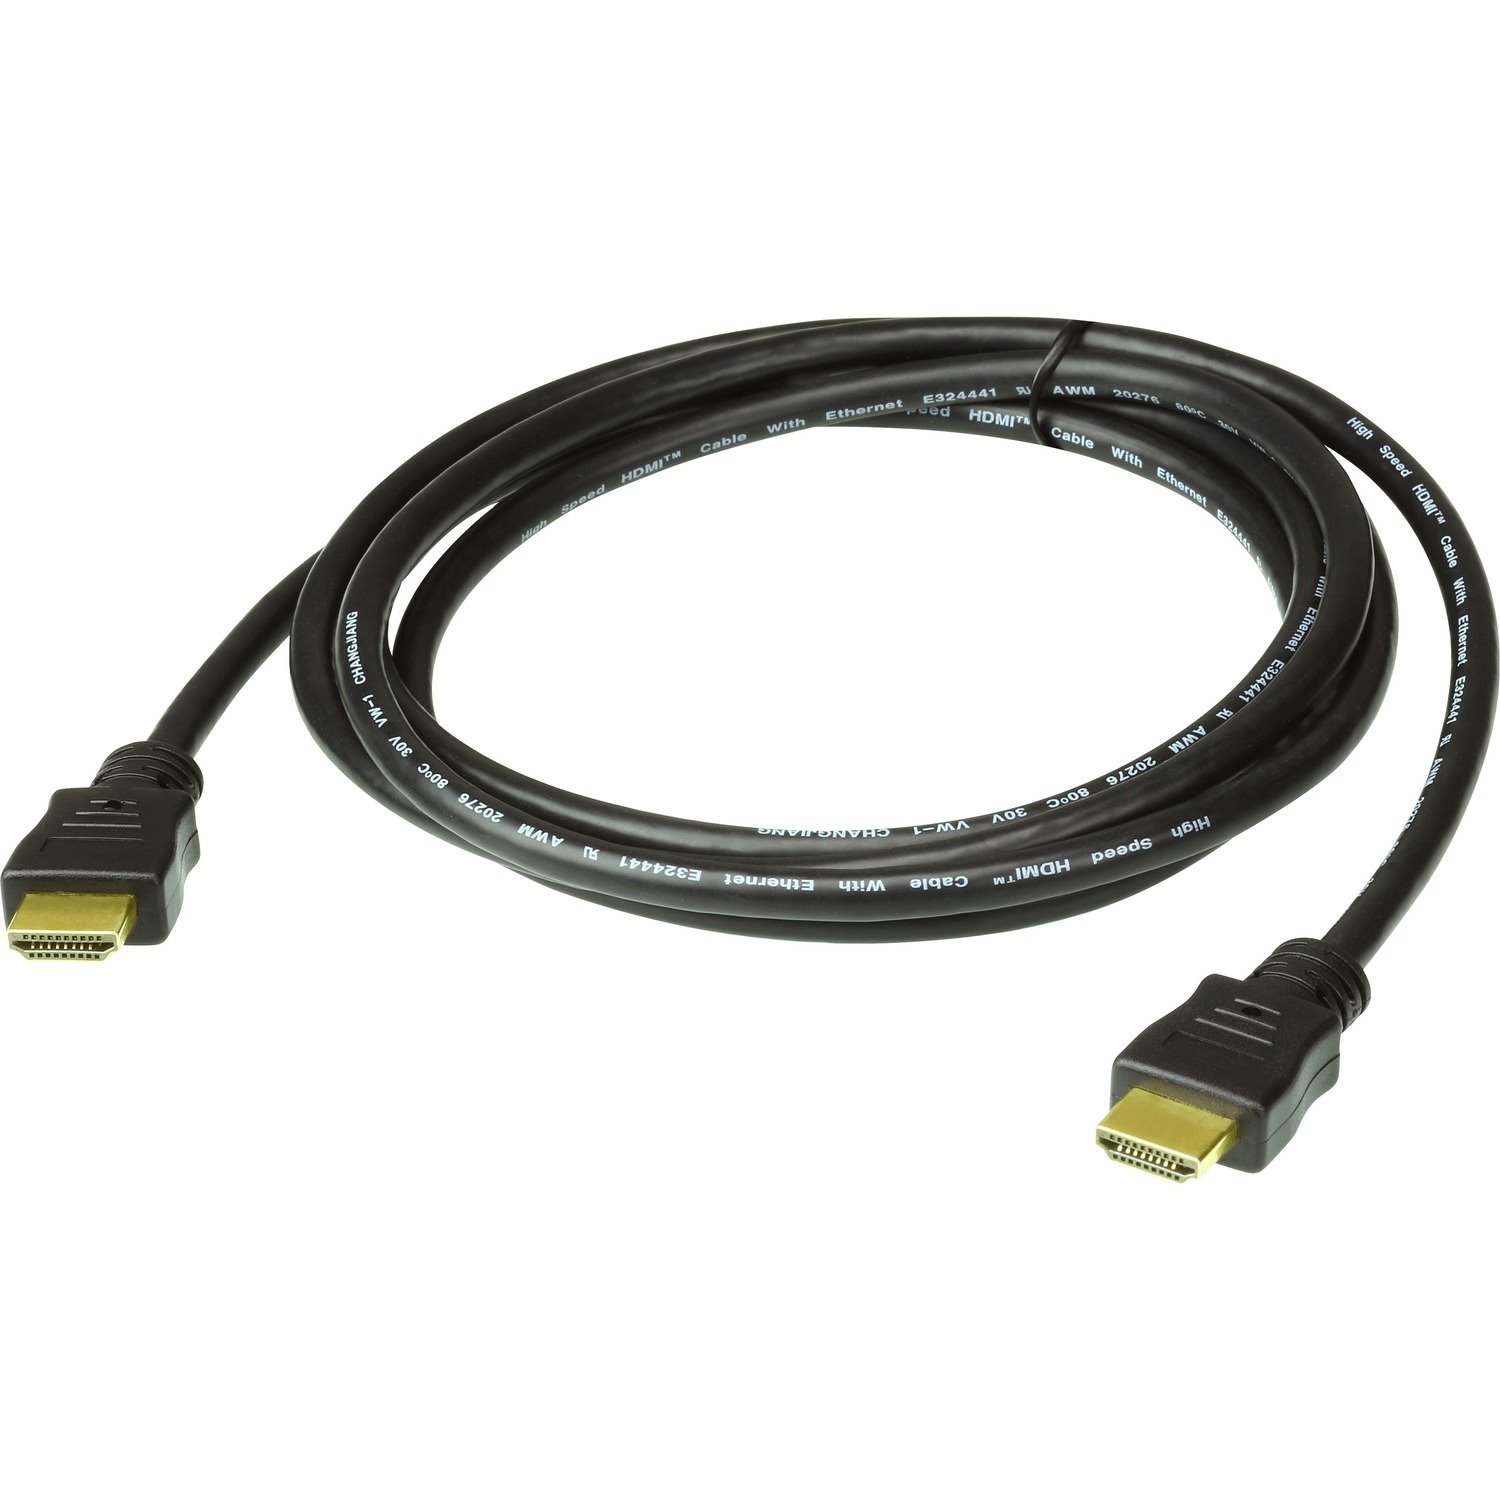 ATEN 3 m HDMI A/V Cable for Audio/Video Device, Switch